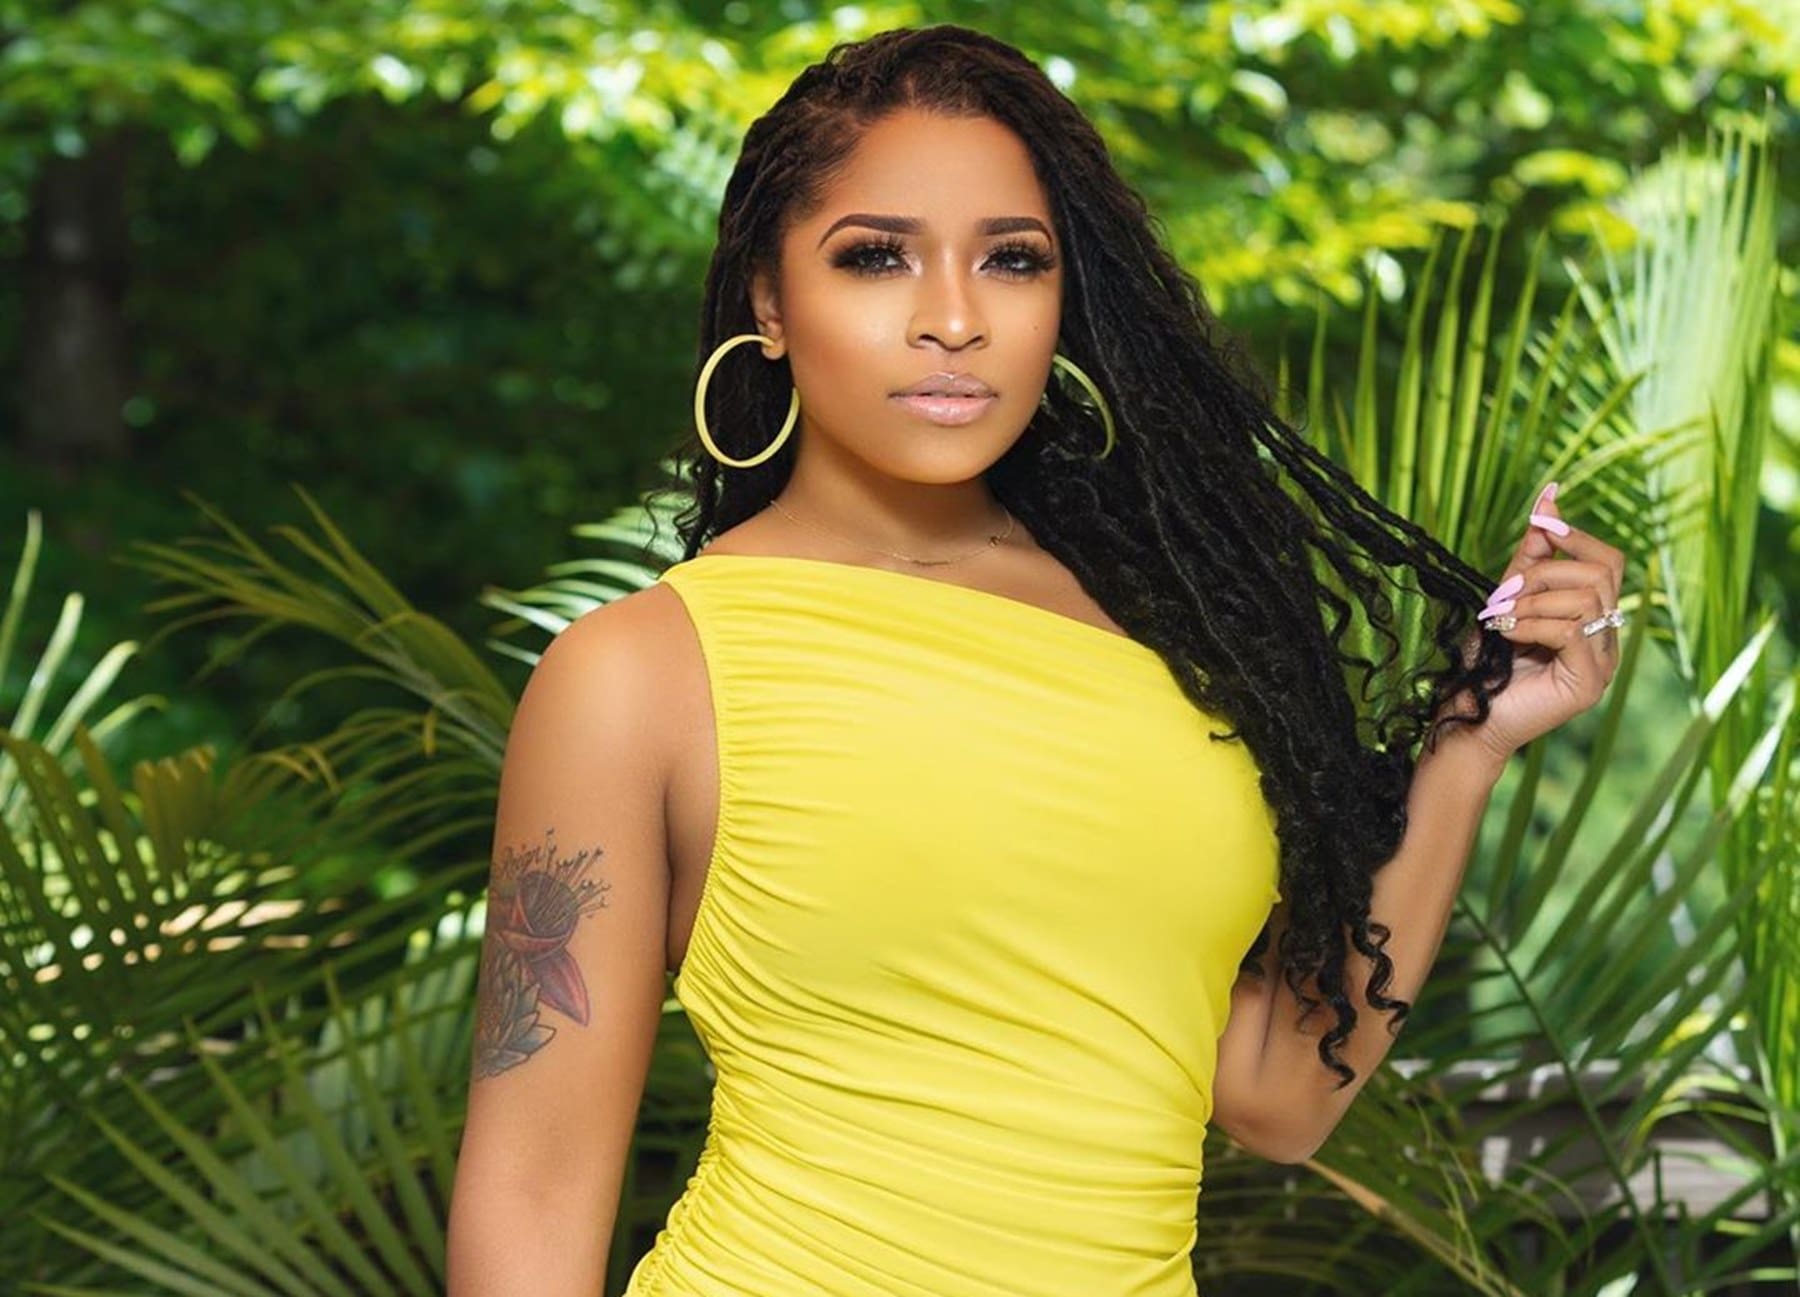 Toya Johnson Uplifts Women - Check Out The Emotional Message She Shared